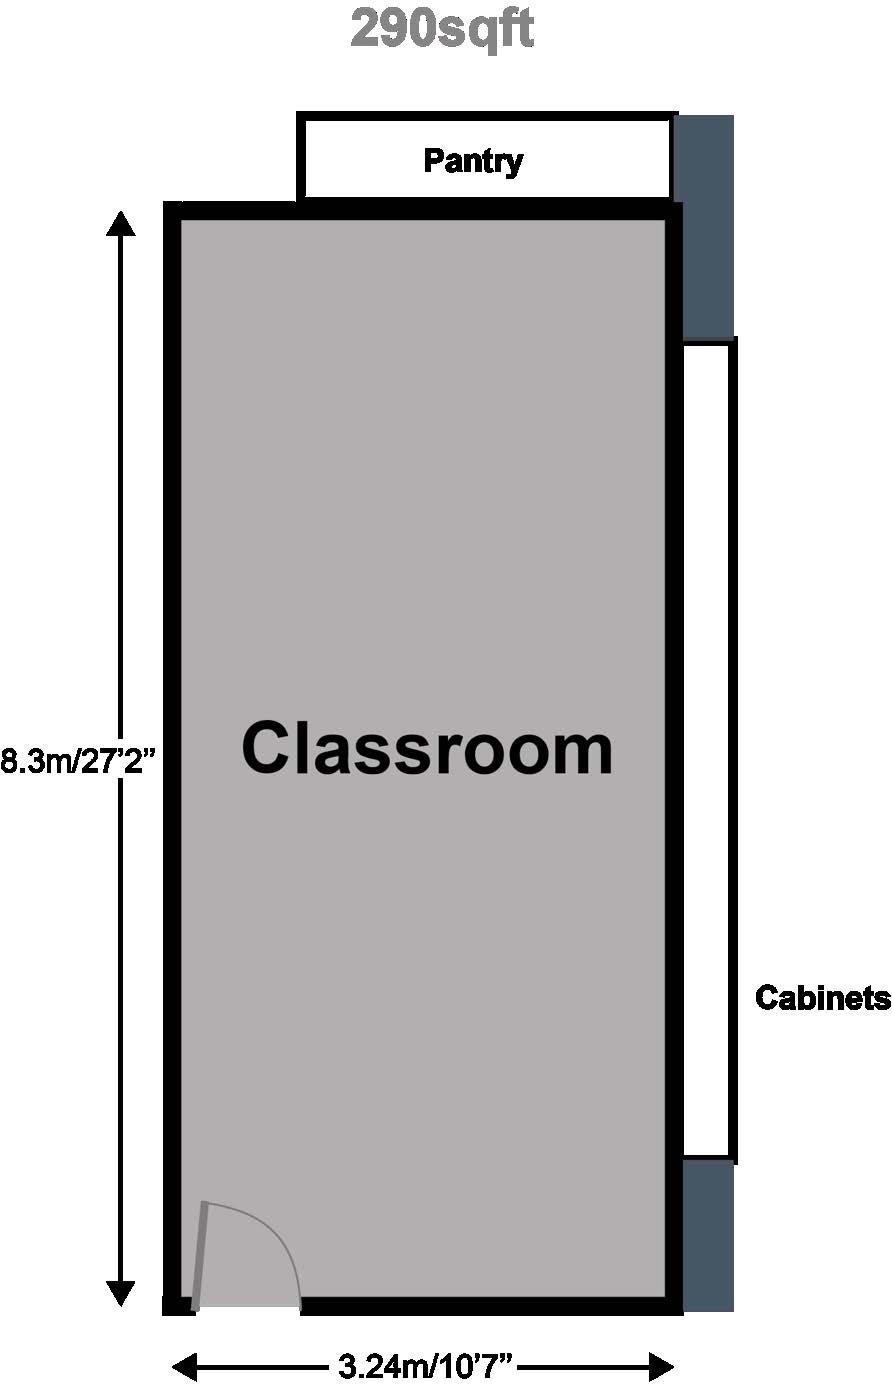 SINGAPORE STUDIO - LEVEL FOUR Multi-Purpose Classroom SPECIFICATIONS - 290 sq ft of space - 1 X 3 hp aircon